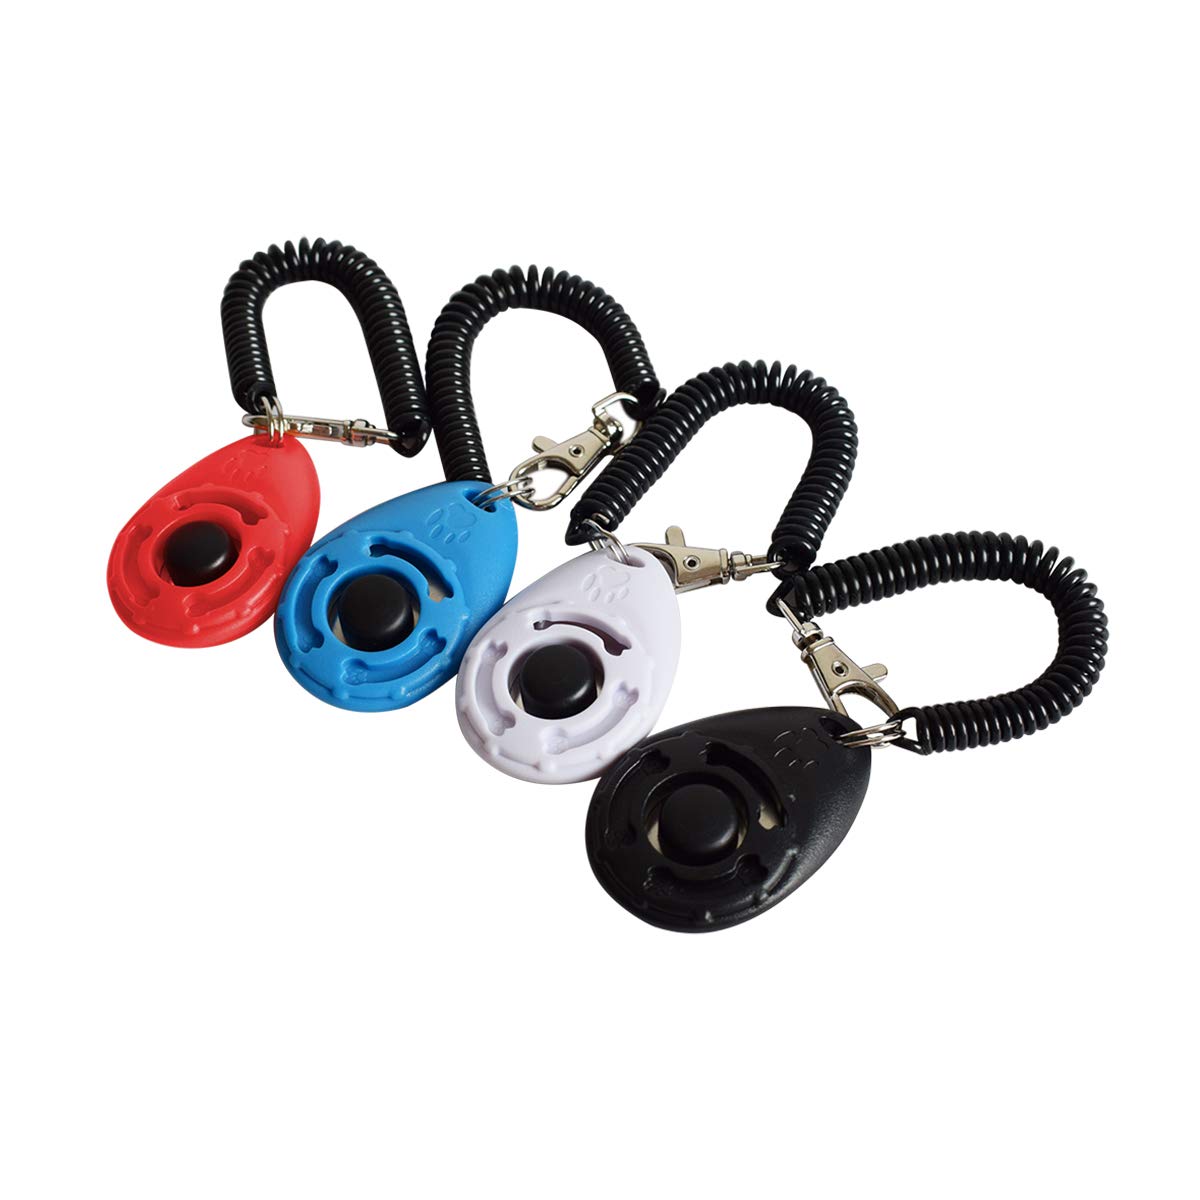 Book Cover Ruconla- 4 Pack Dog Training Clicker with Wrist Strap, Pet Training Clicker Set